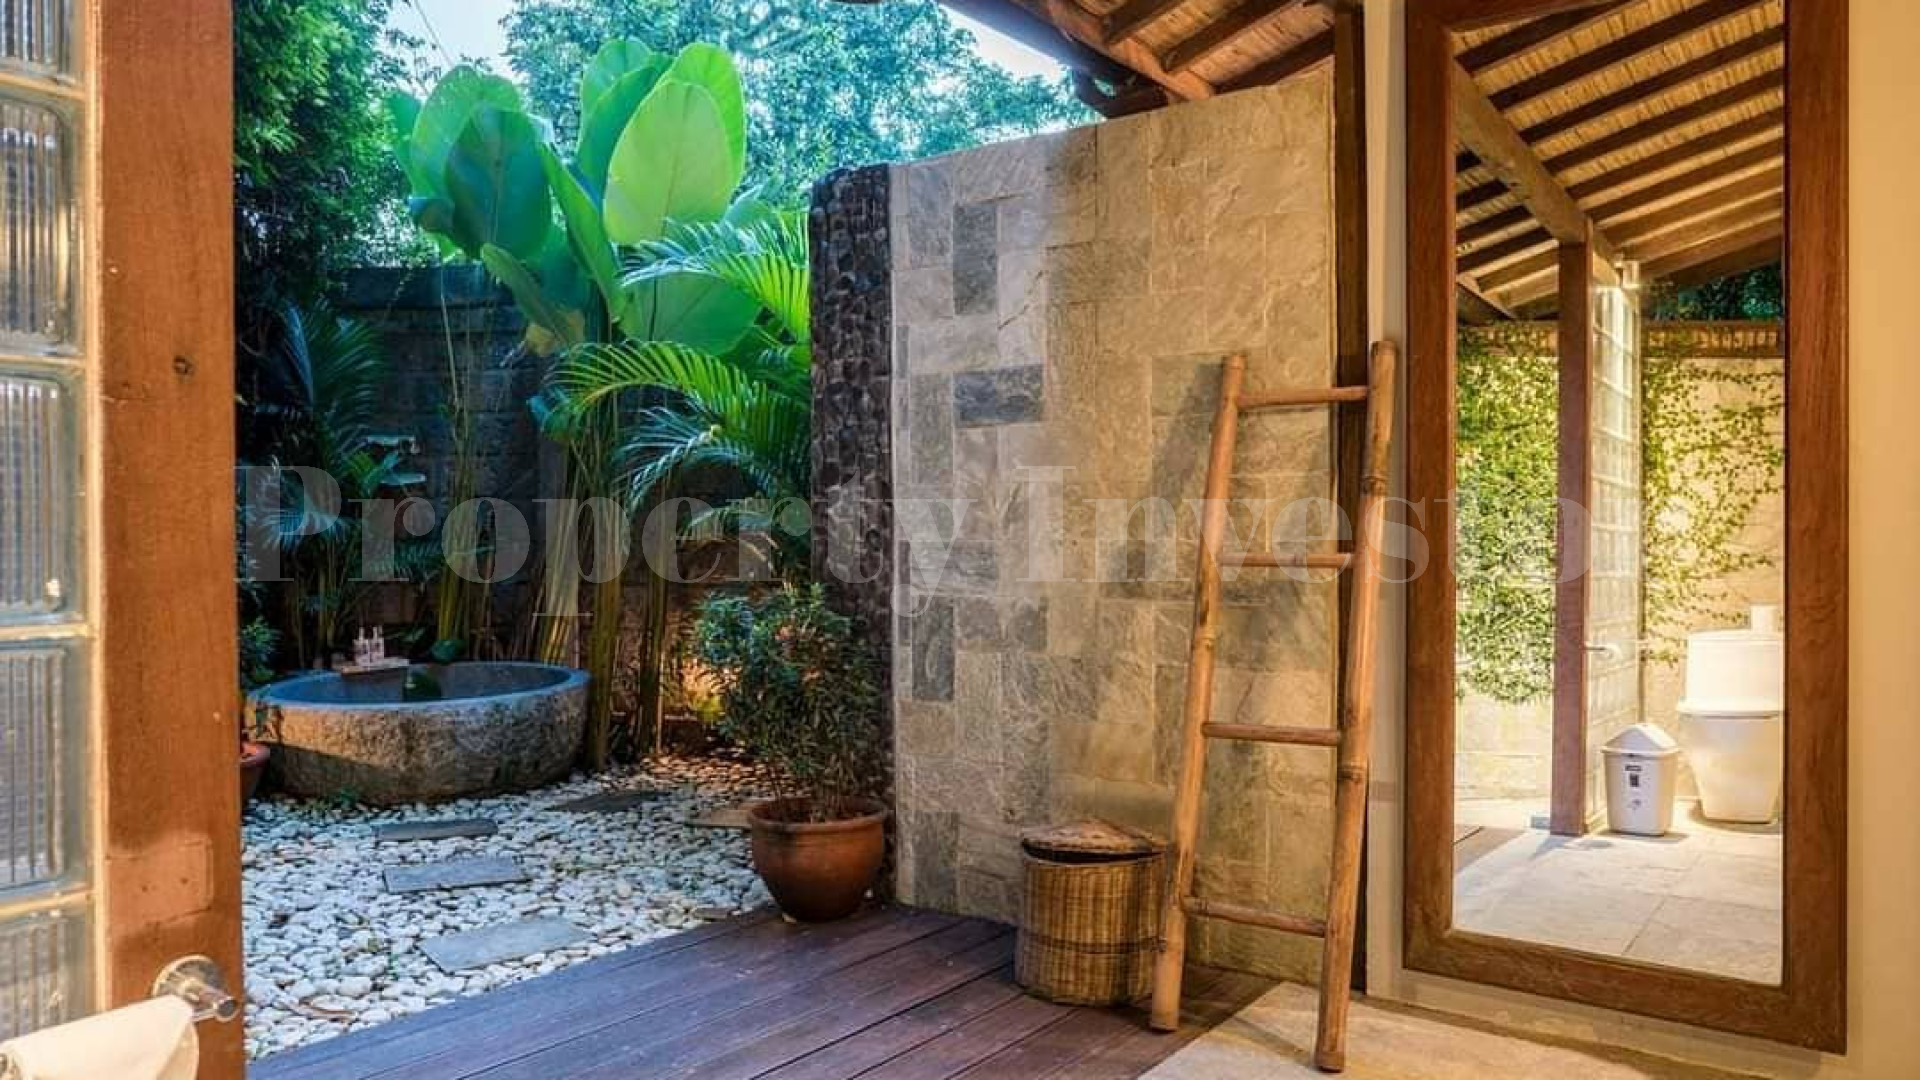 Expansive 7 Bedroom Private Estate with Beautifully Groomed Gardens for Sale in Kerobokan, Bali